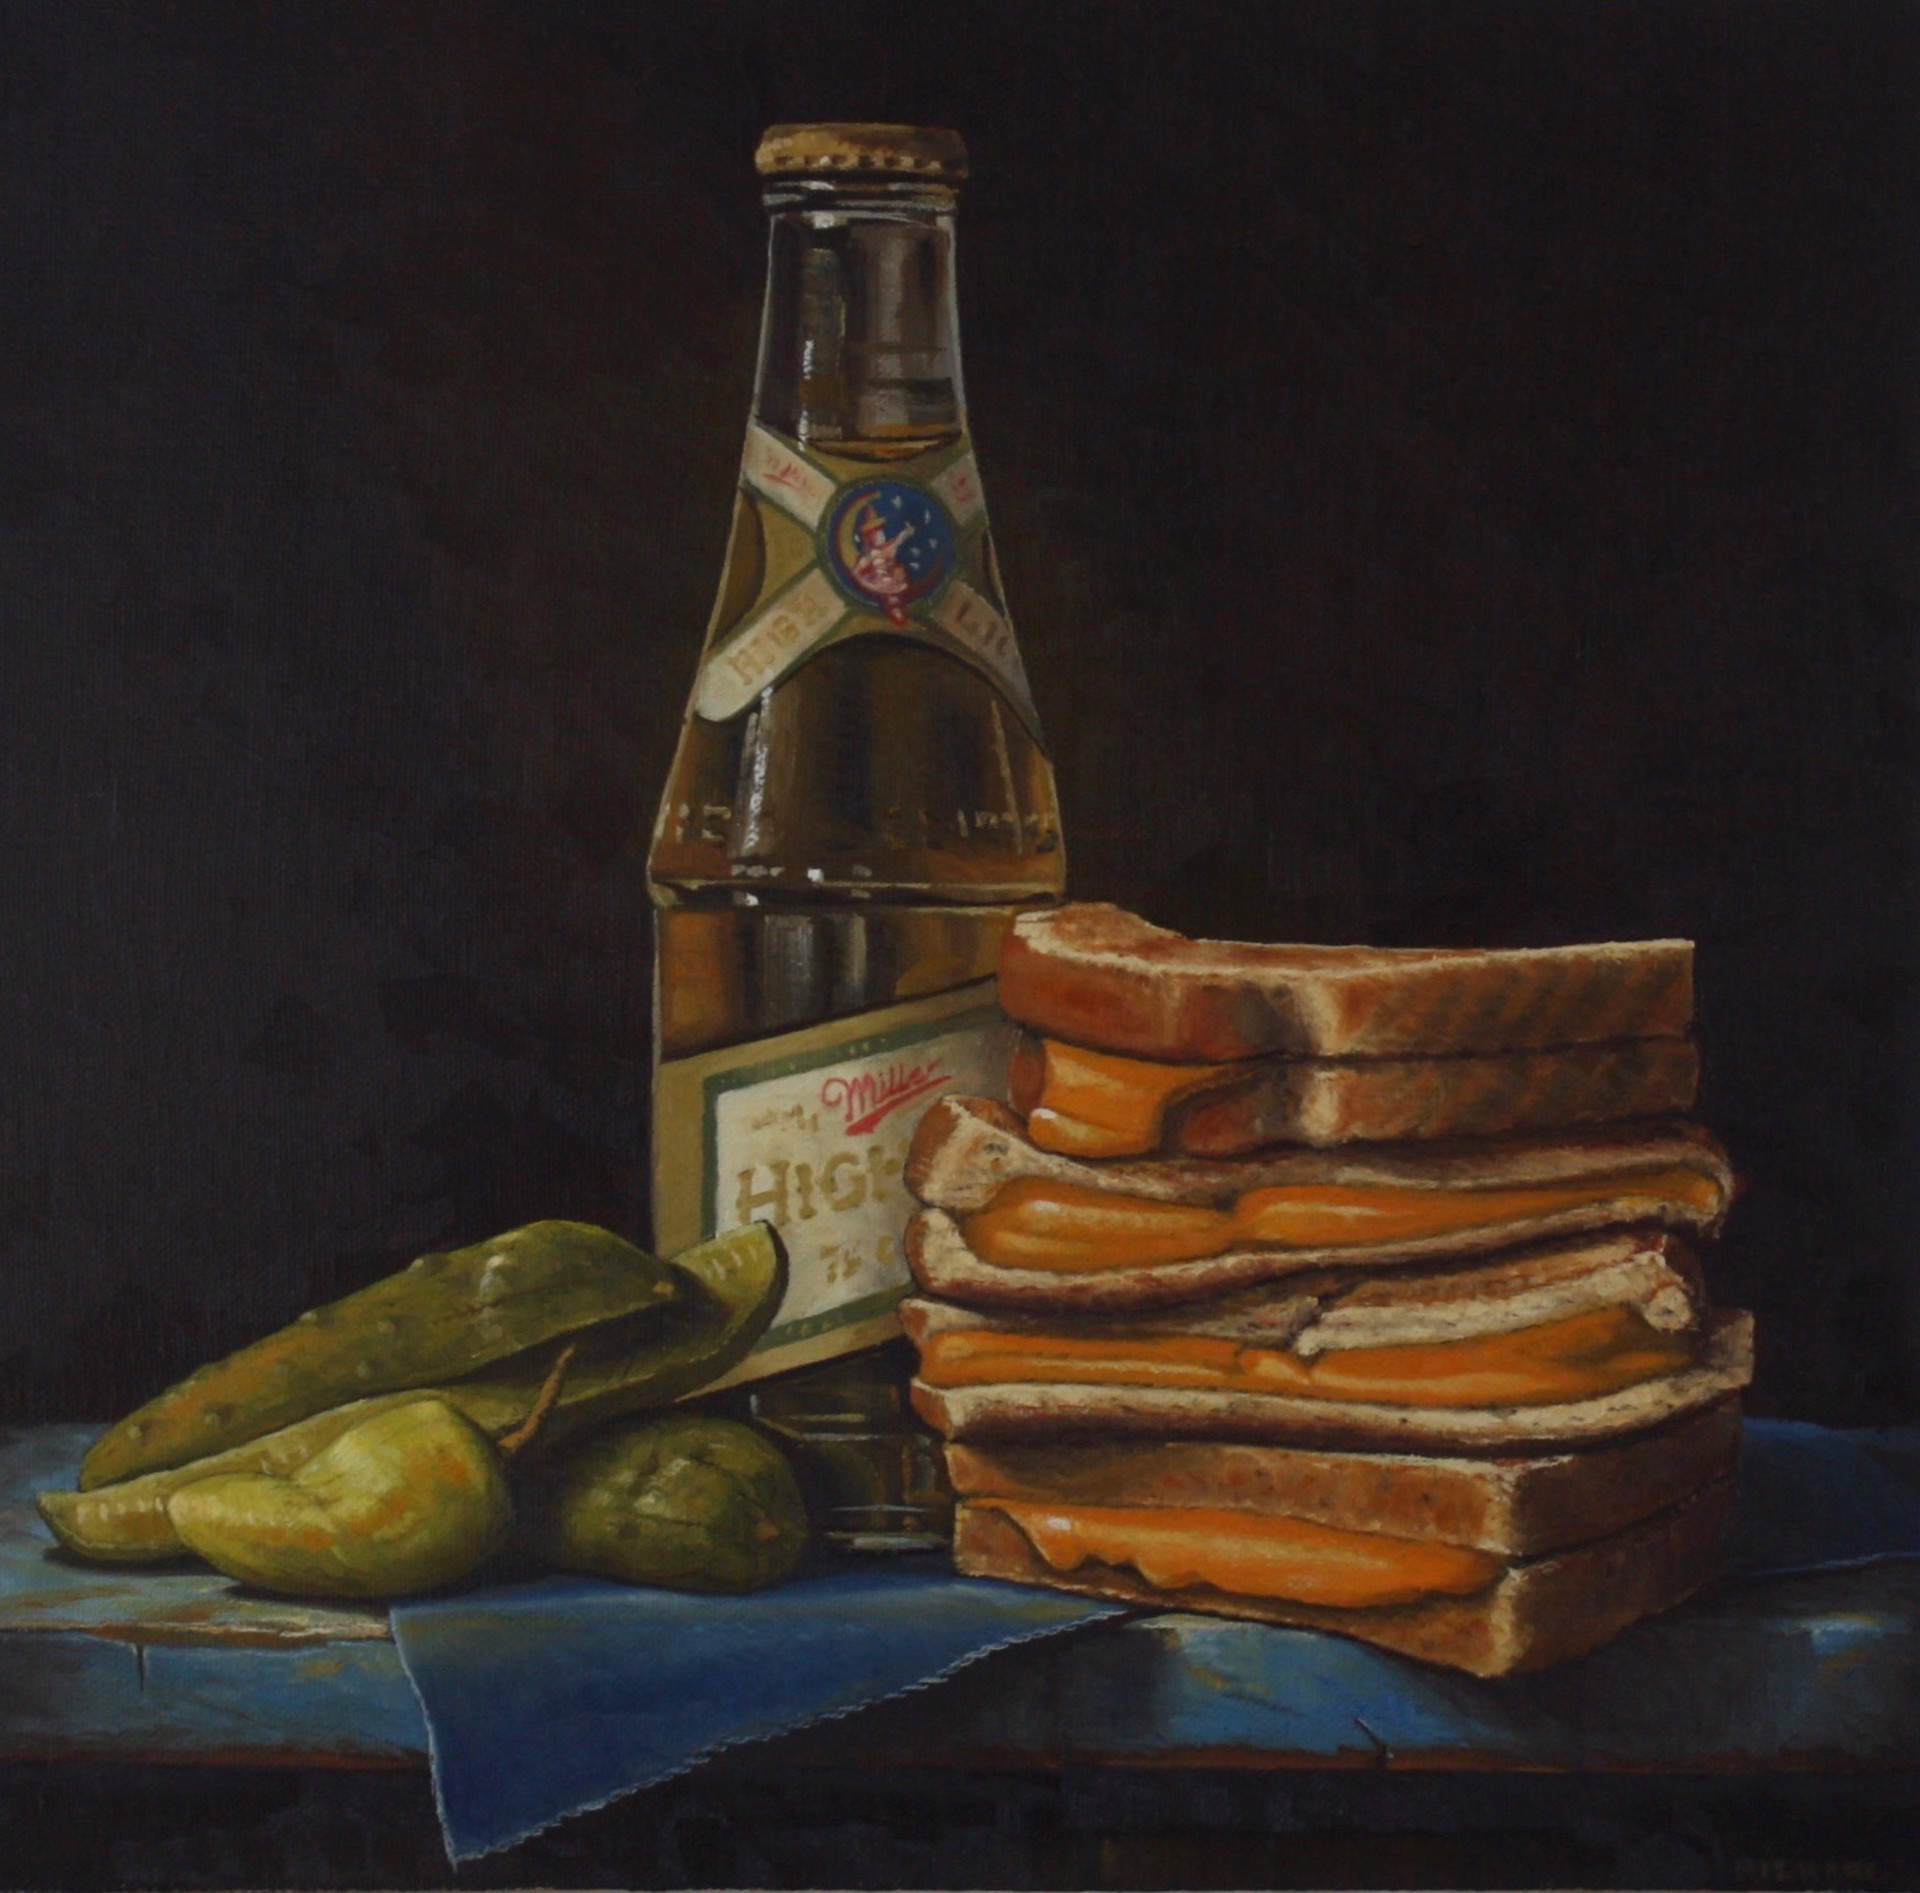 Grilled Cheese High Life by Hickory Mertsching